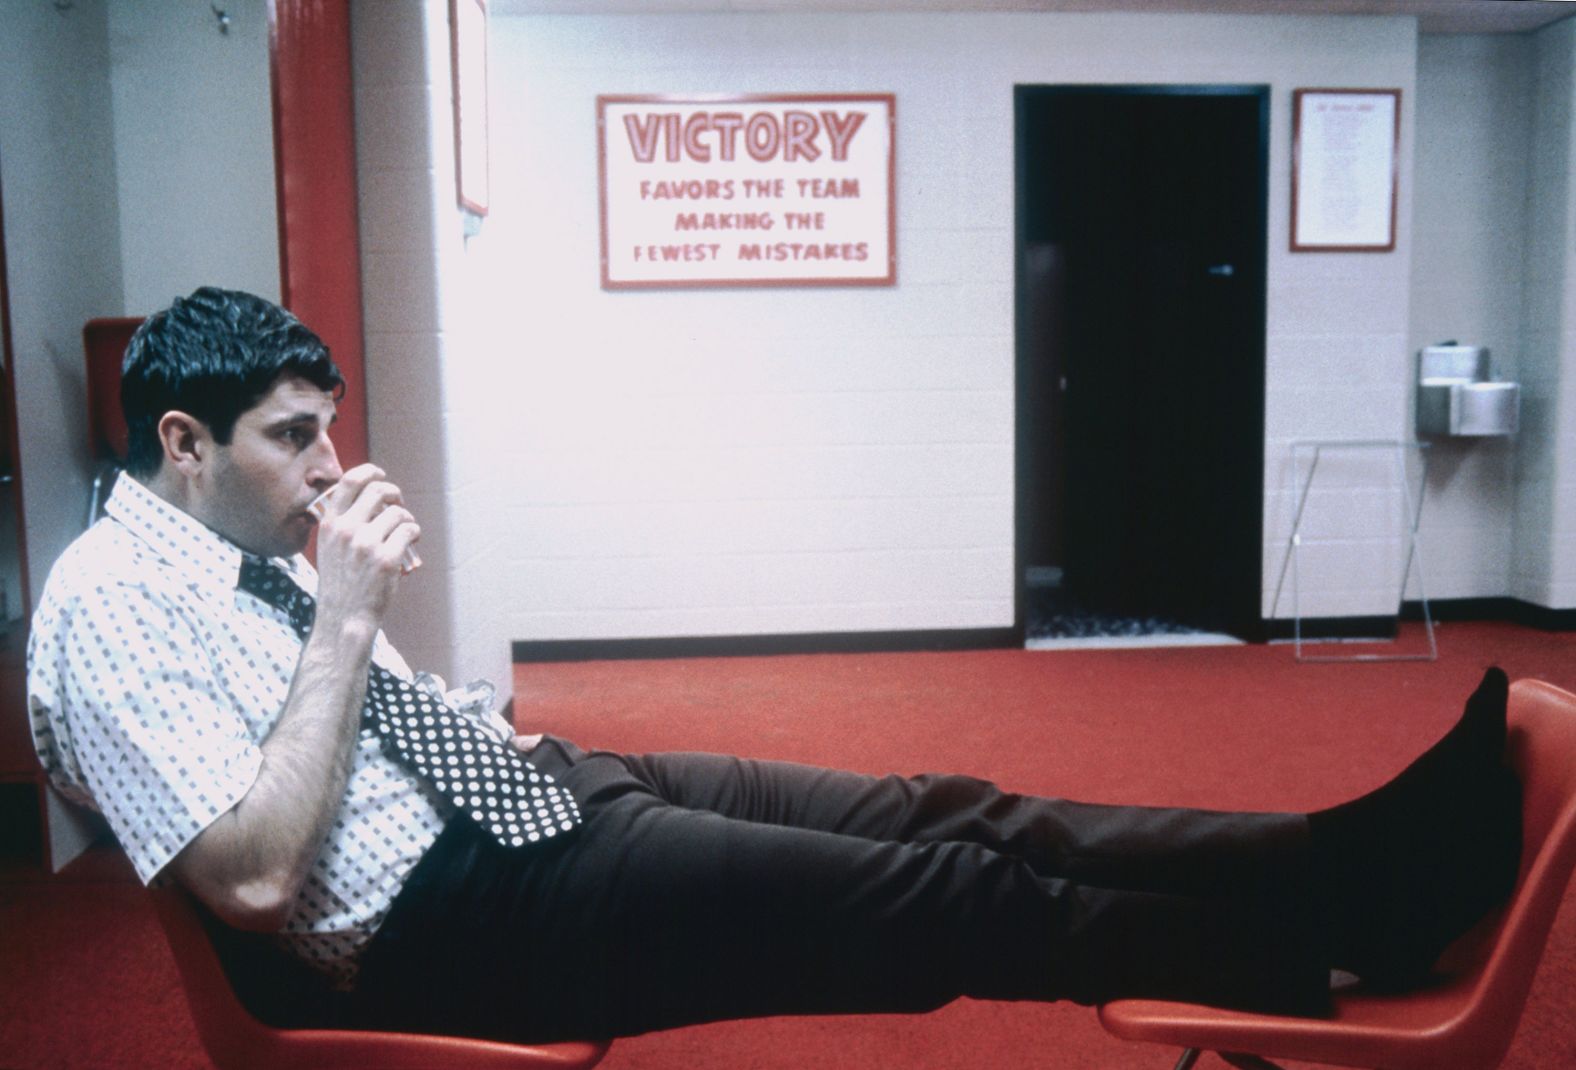 Knight sits in the locker room after a game in 1973.